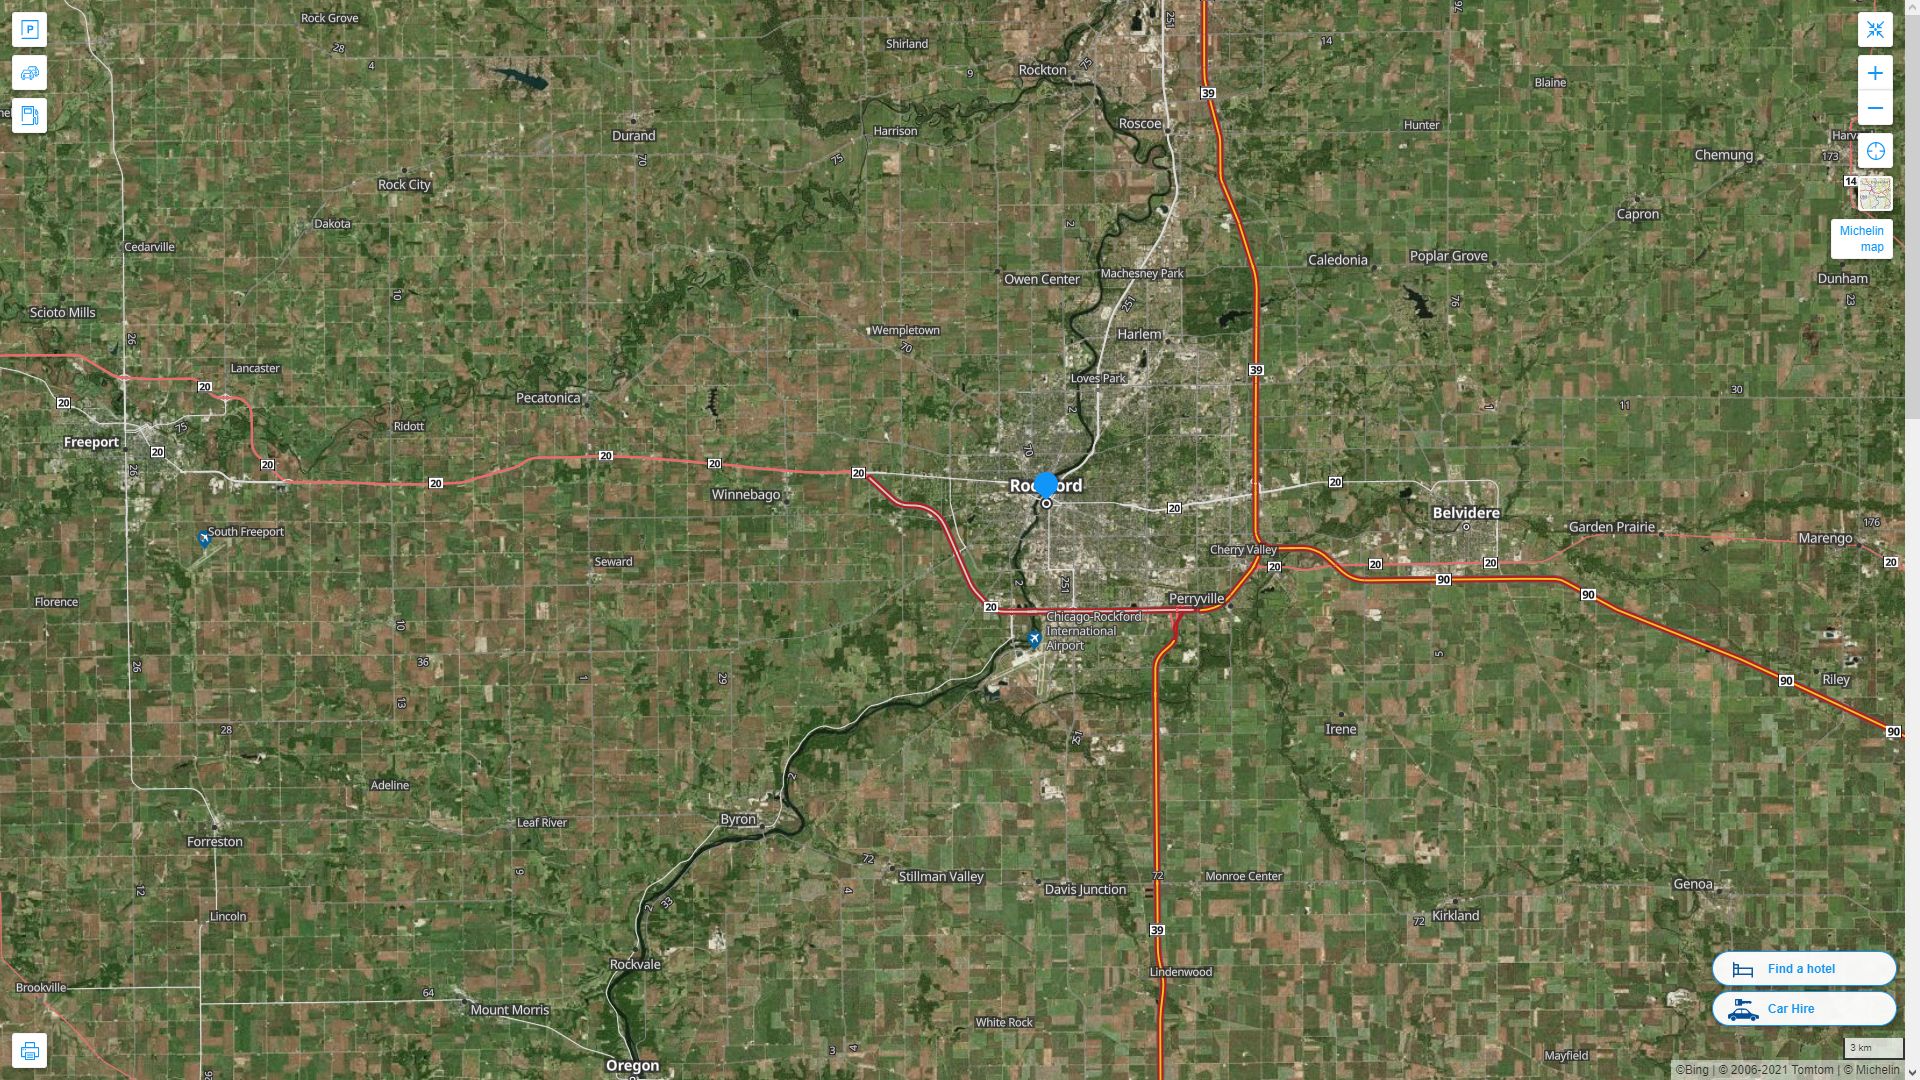 Rockford illinois Highway and Road Map with Satellite View